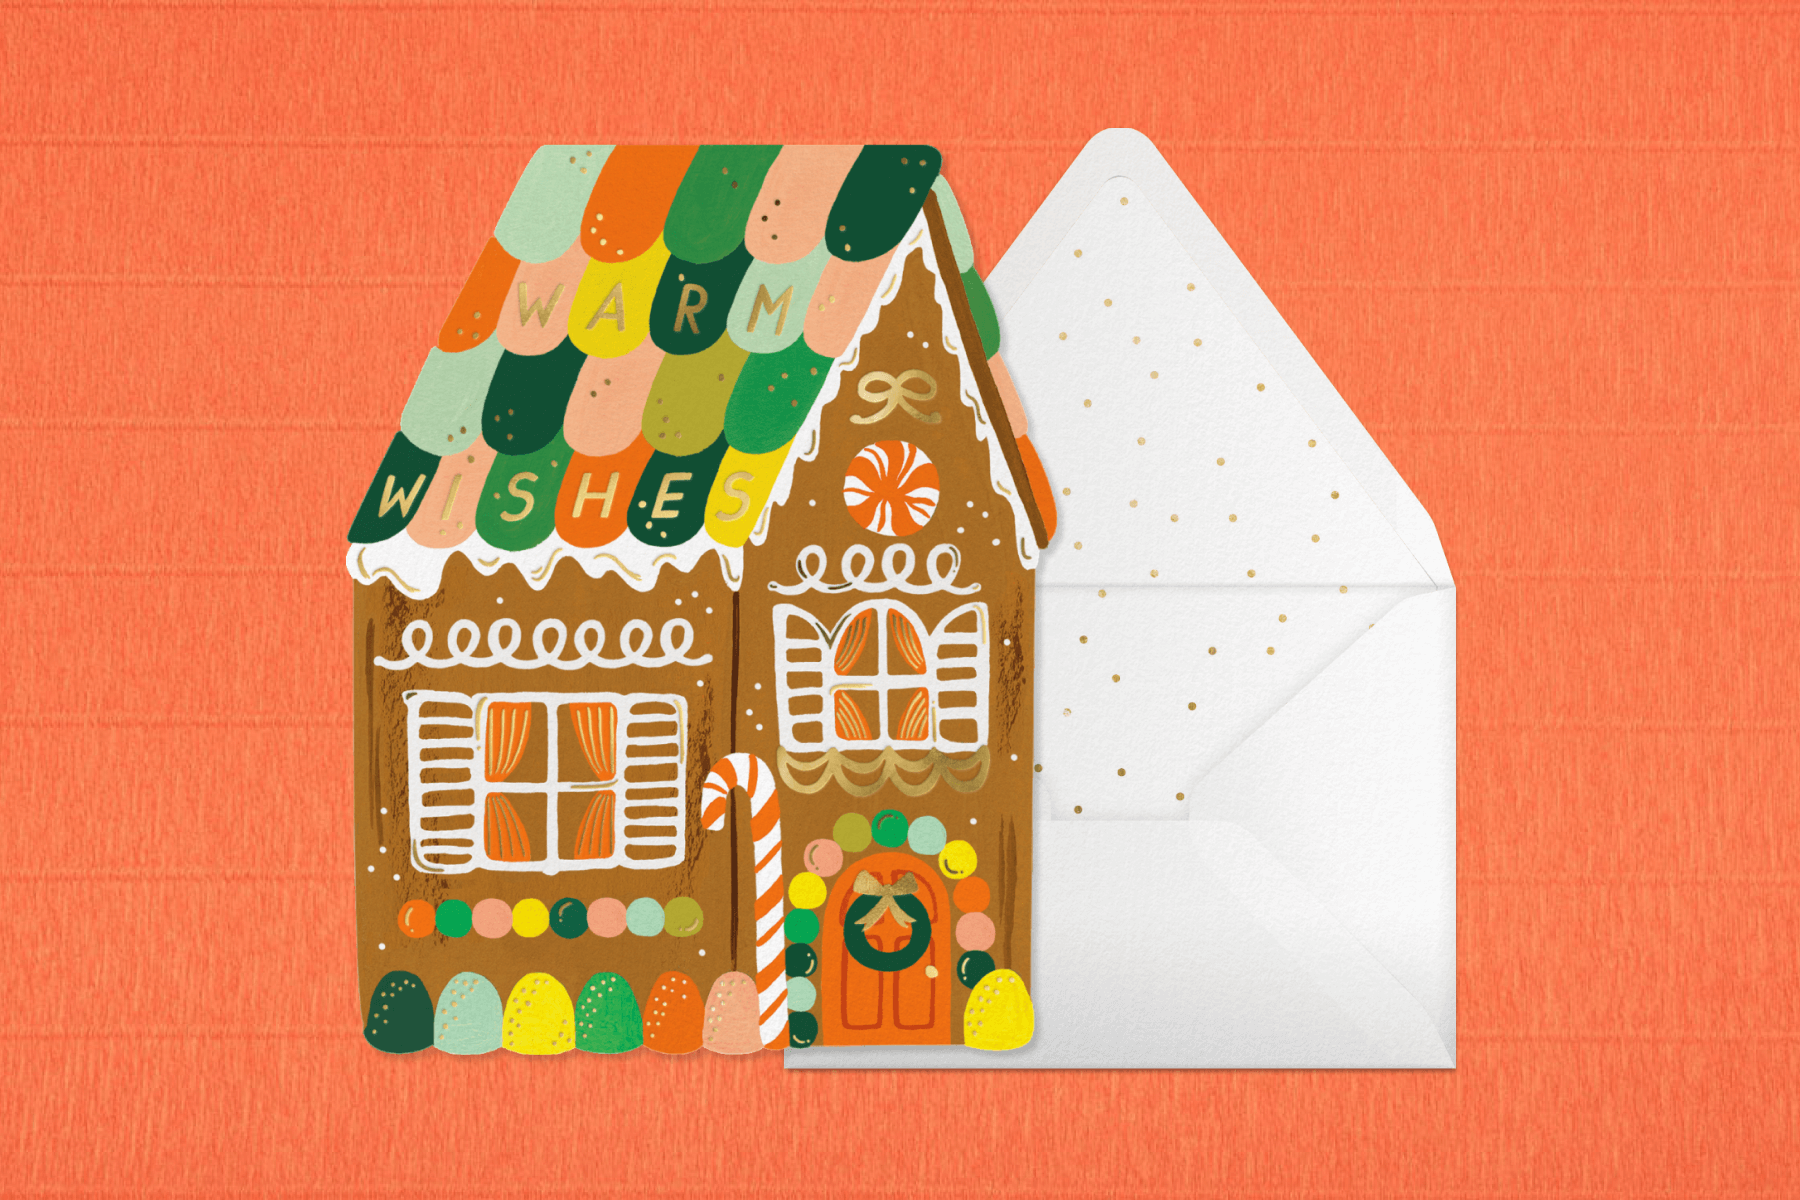 A card in the shape of a gingerbread house decorated with candy.